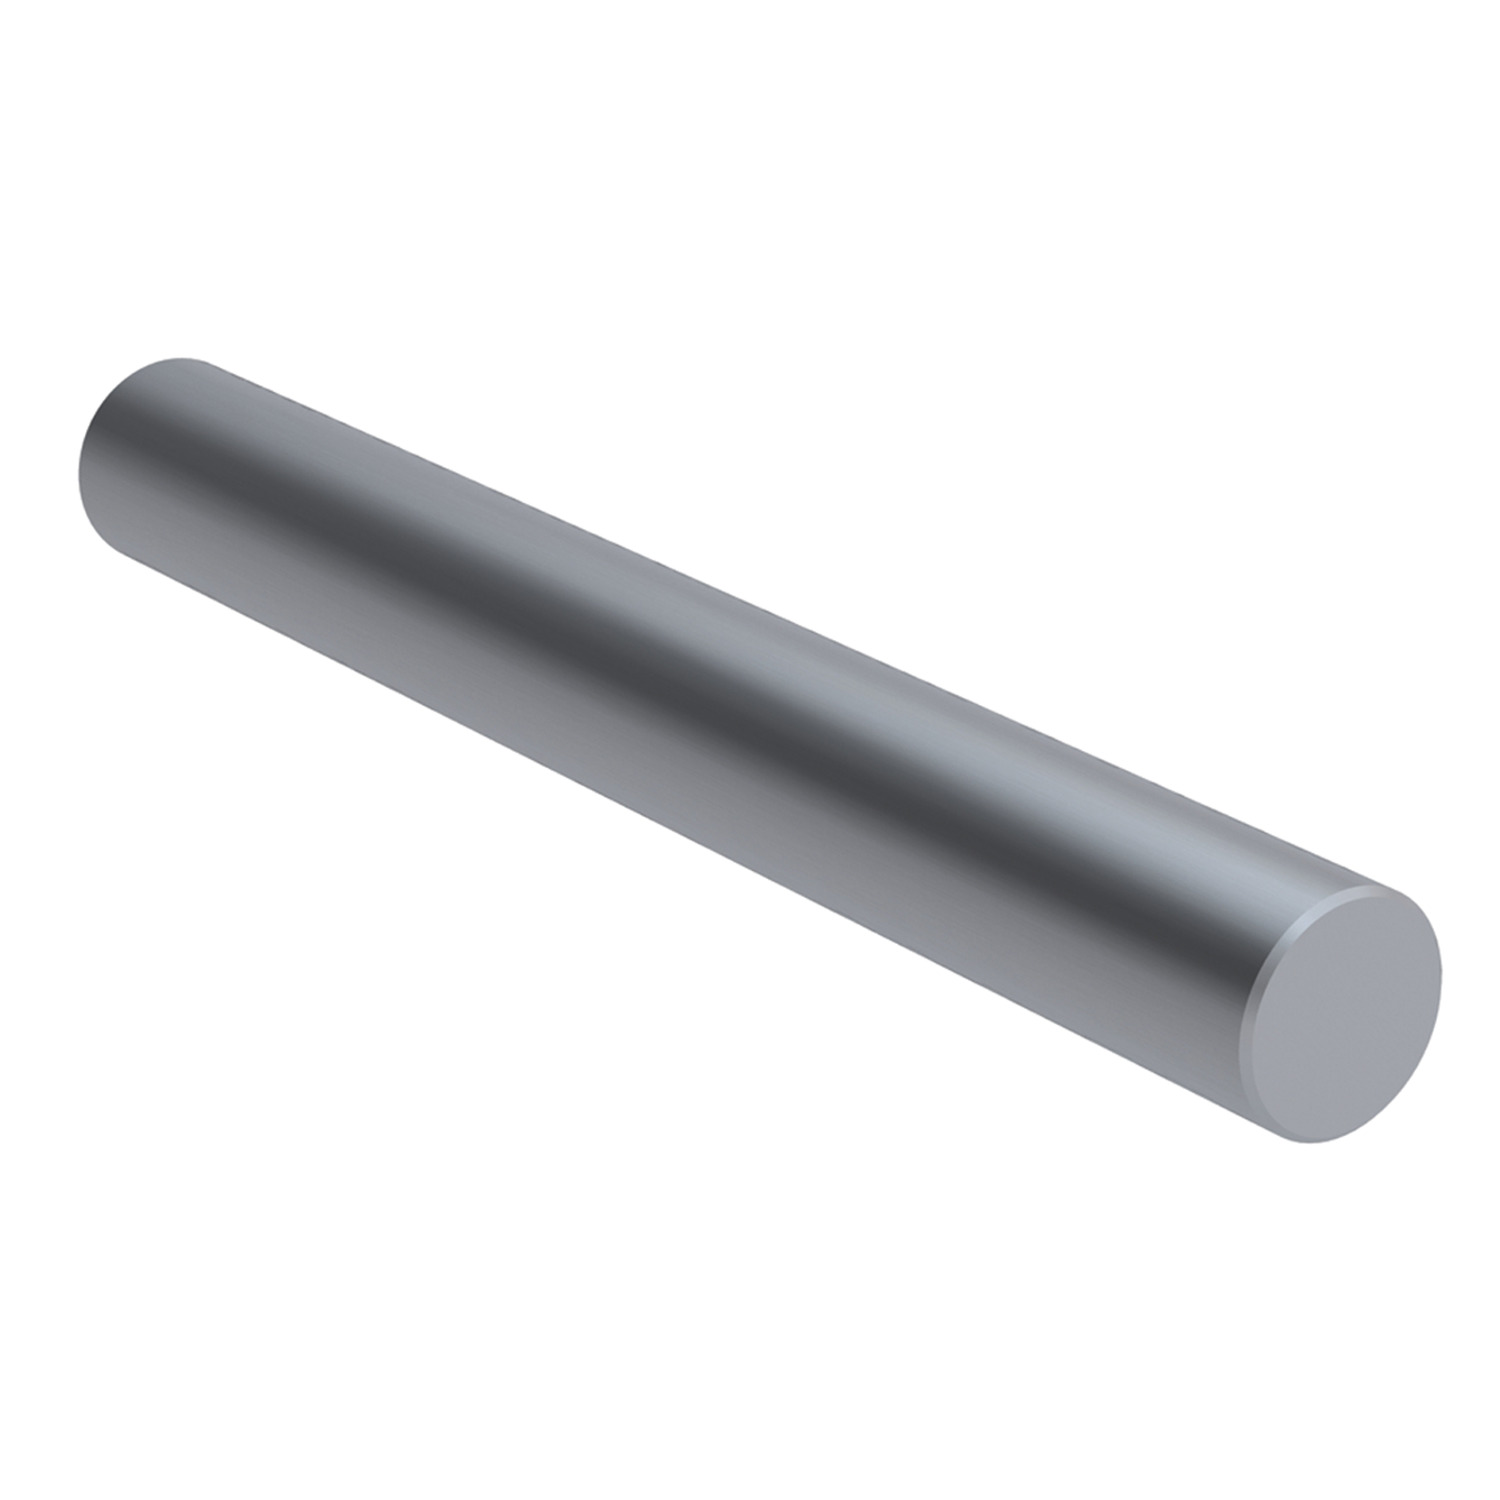 Product L1772.06, Ø6 Hardened Stainless Shafts for linear bearings / 